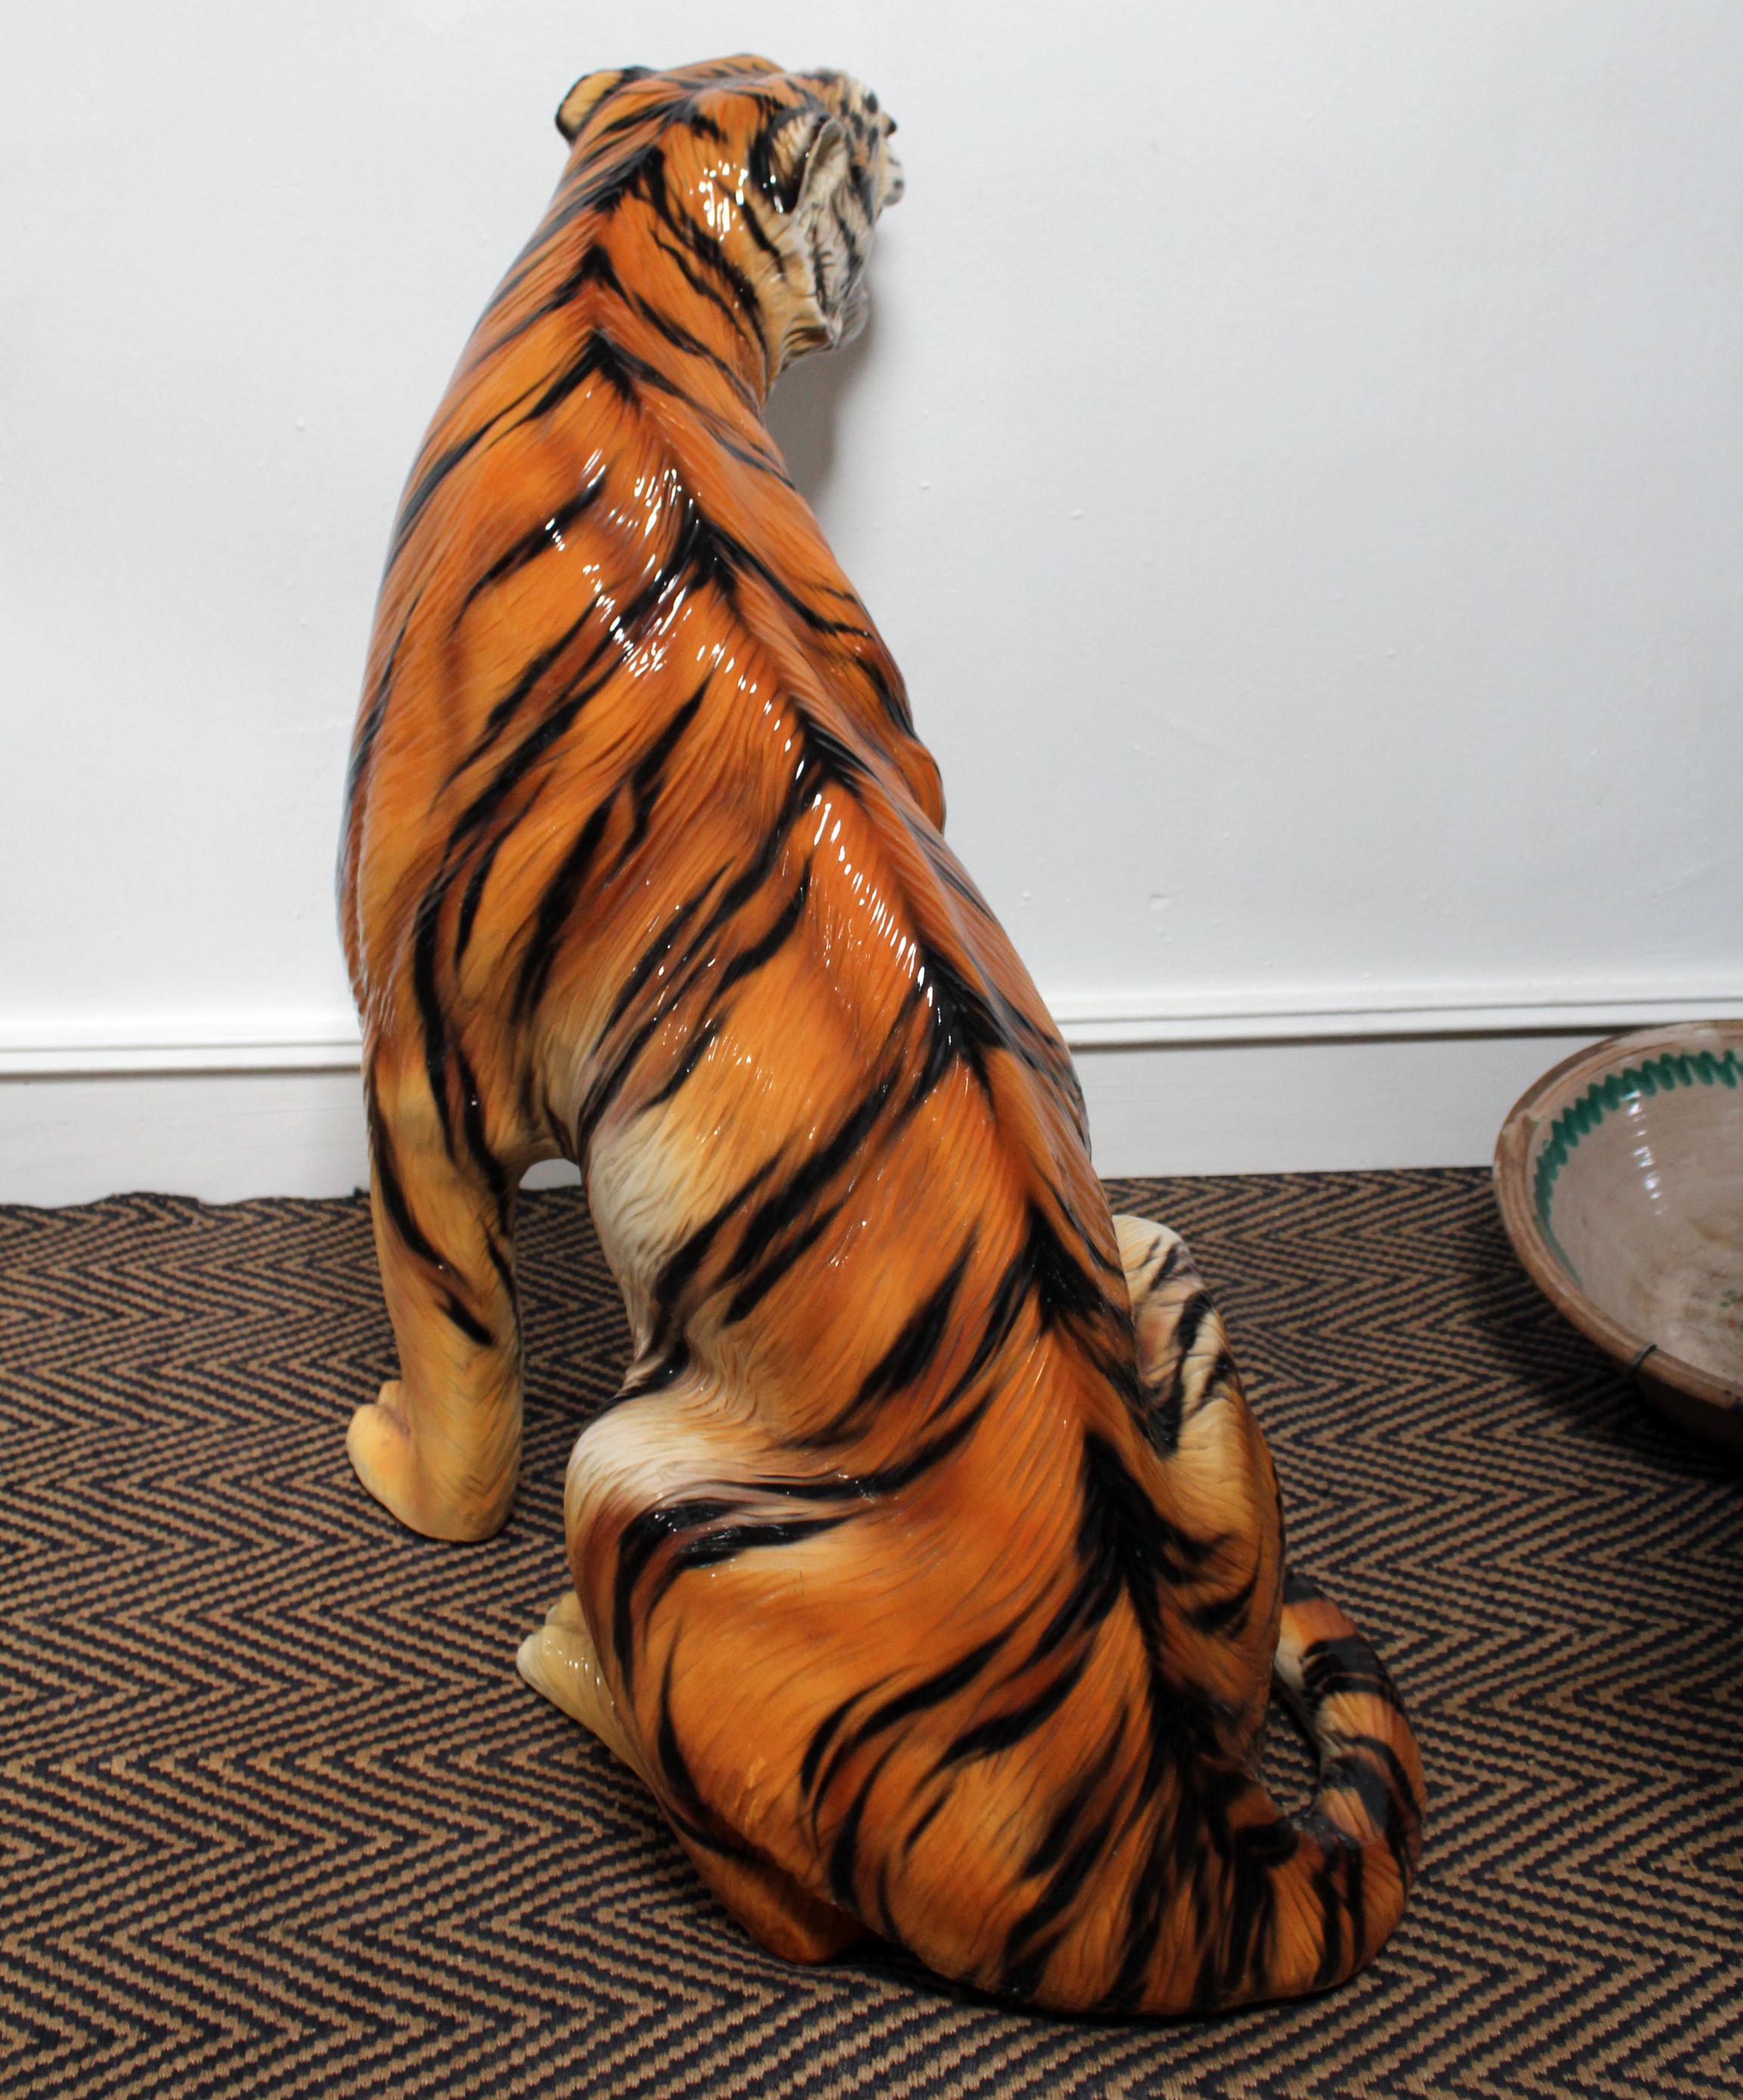 20th Century 1980s Spanish Hand Painted Glazed Ceramic Tiger Sculpture For Sale